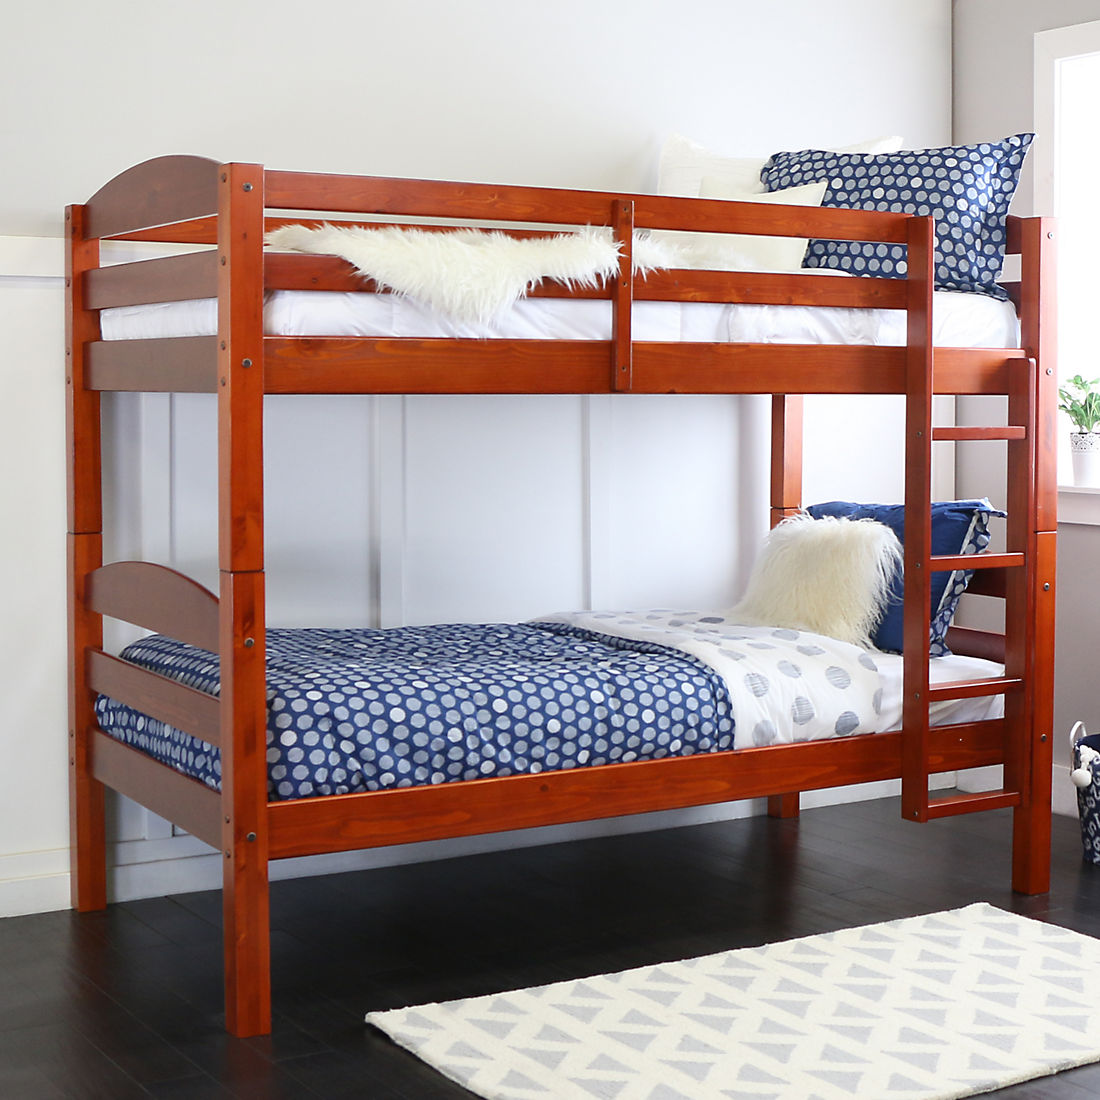 W Trends Twin Size Solid Wood Bunk Bed, Berkley Jensen Bunk Bed Assembly Instructions